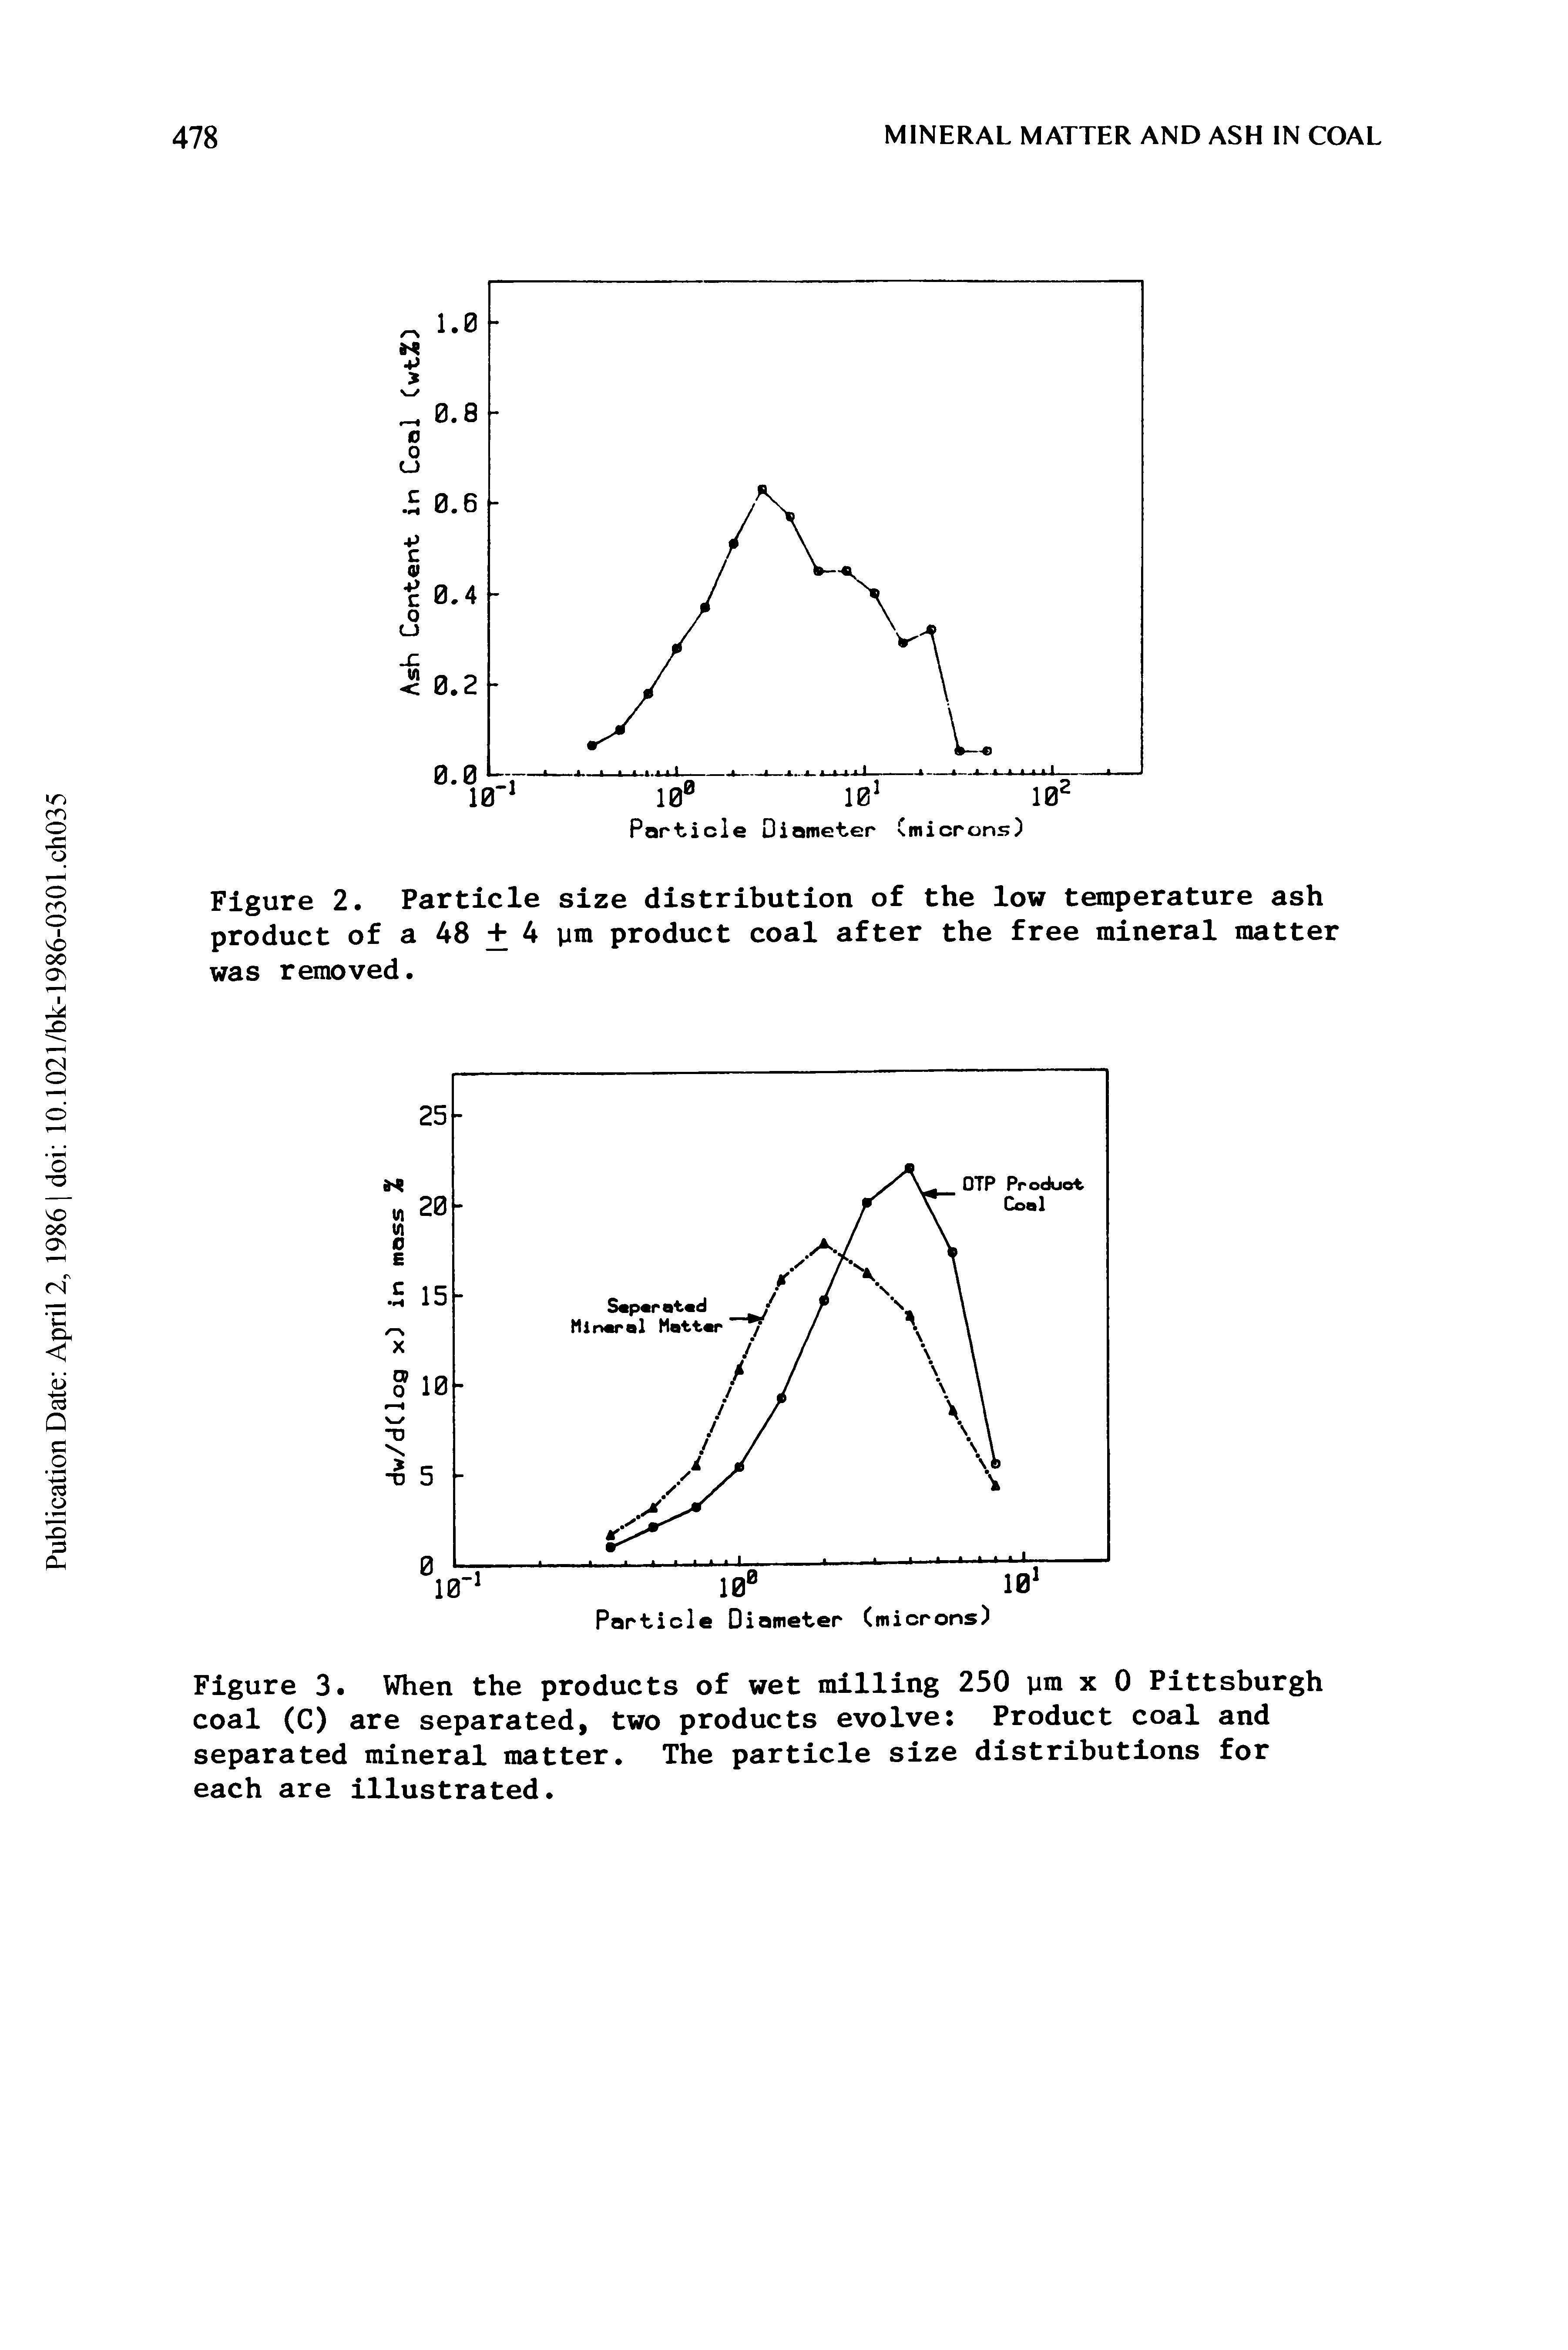 Figure 2. Particle size distribution of the low temperature ash product of a 48 + 4 pm product coal after the free mineral matter was removed.